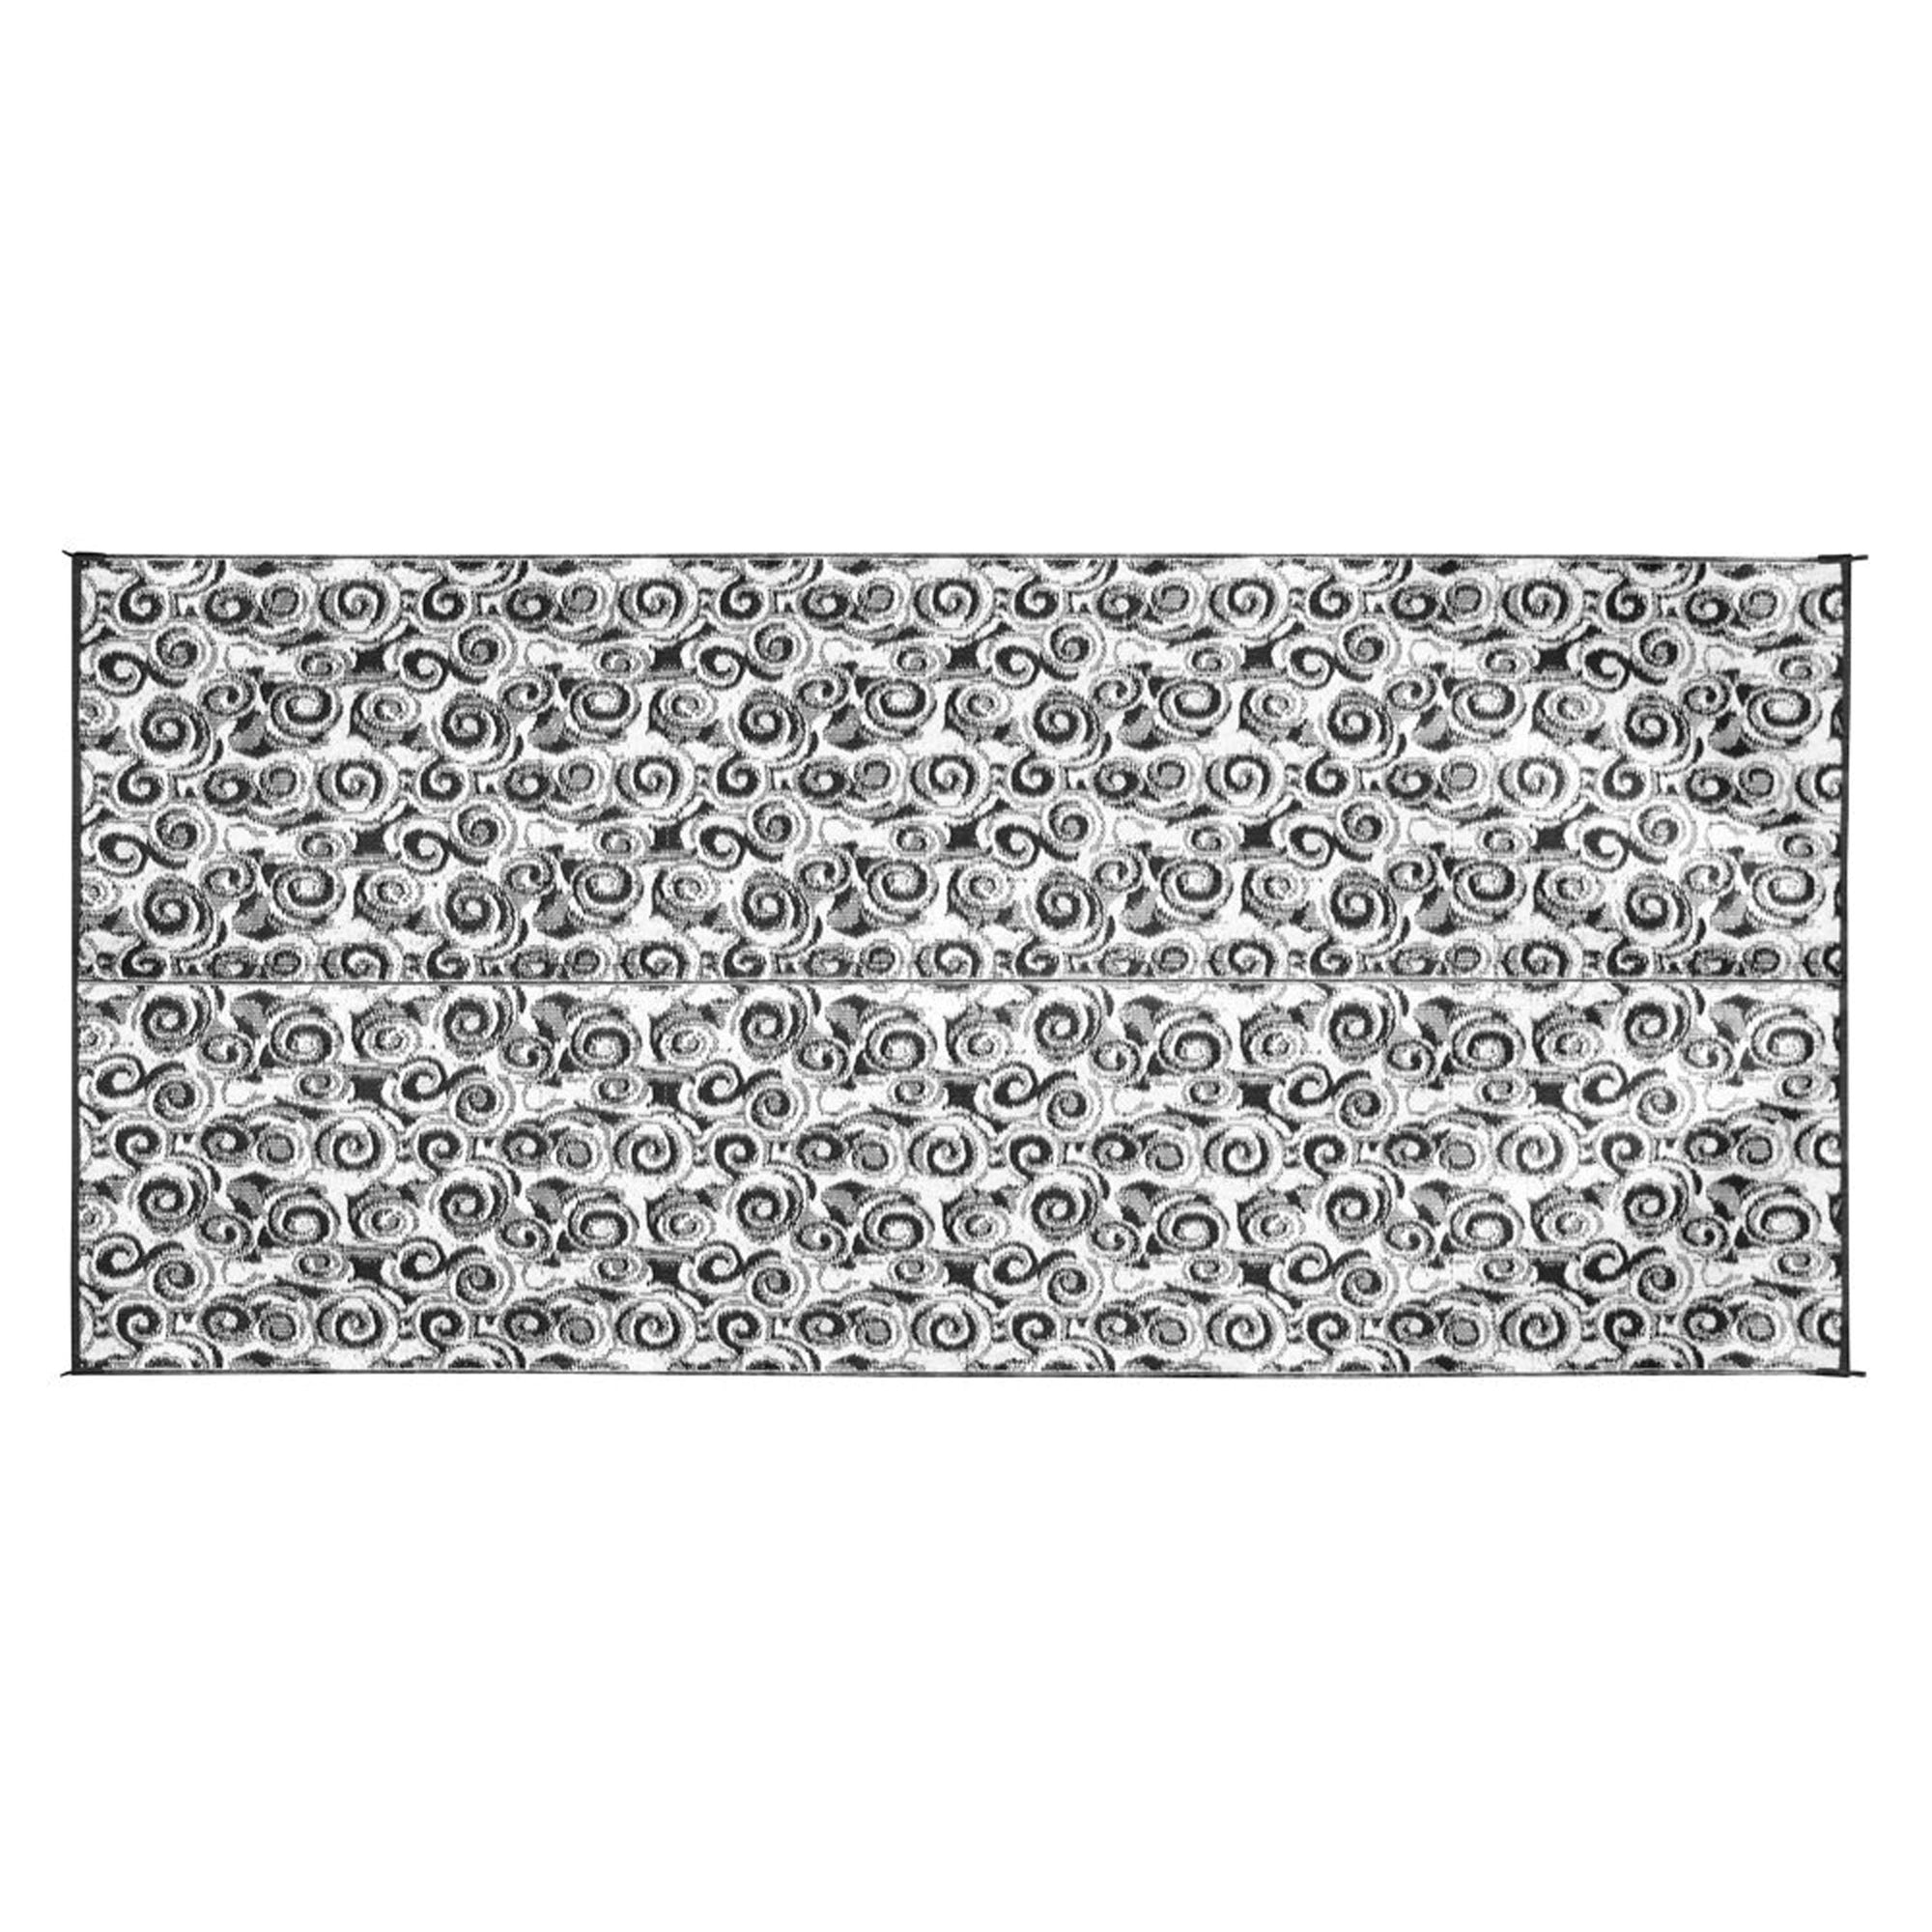 Camco 42843 Swirl Awning Leisure Mat - 8' x 16', Charcoal